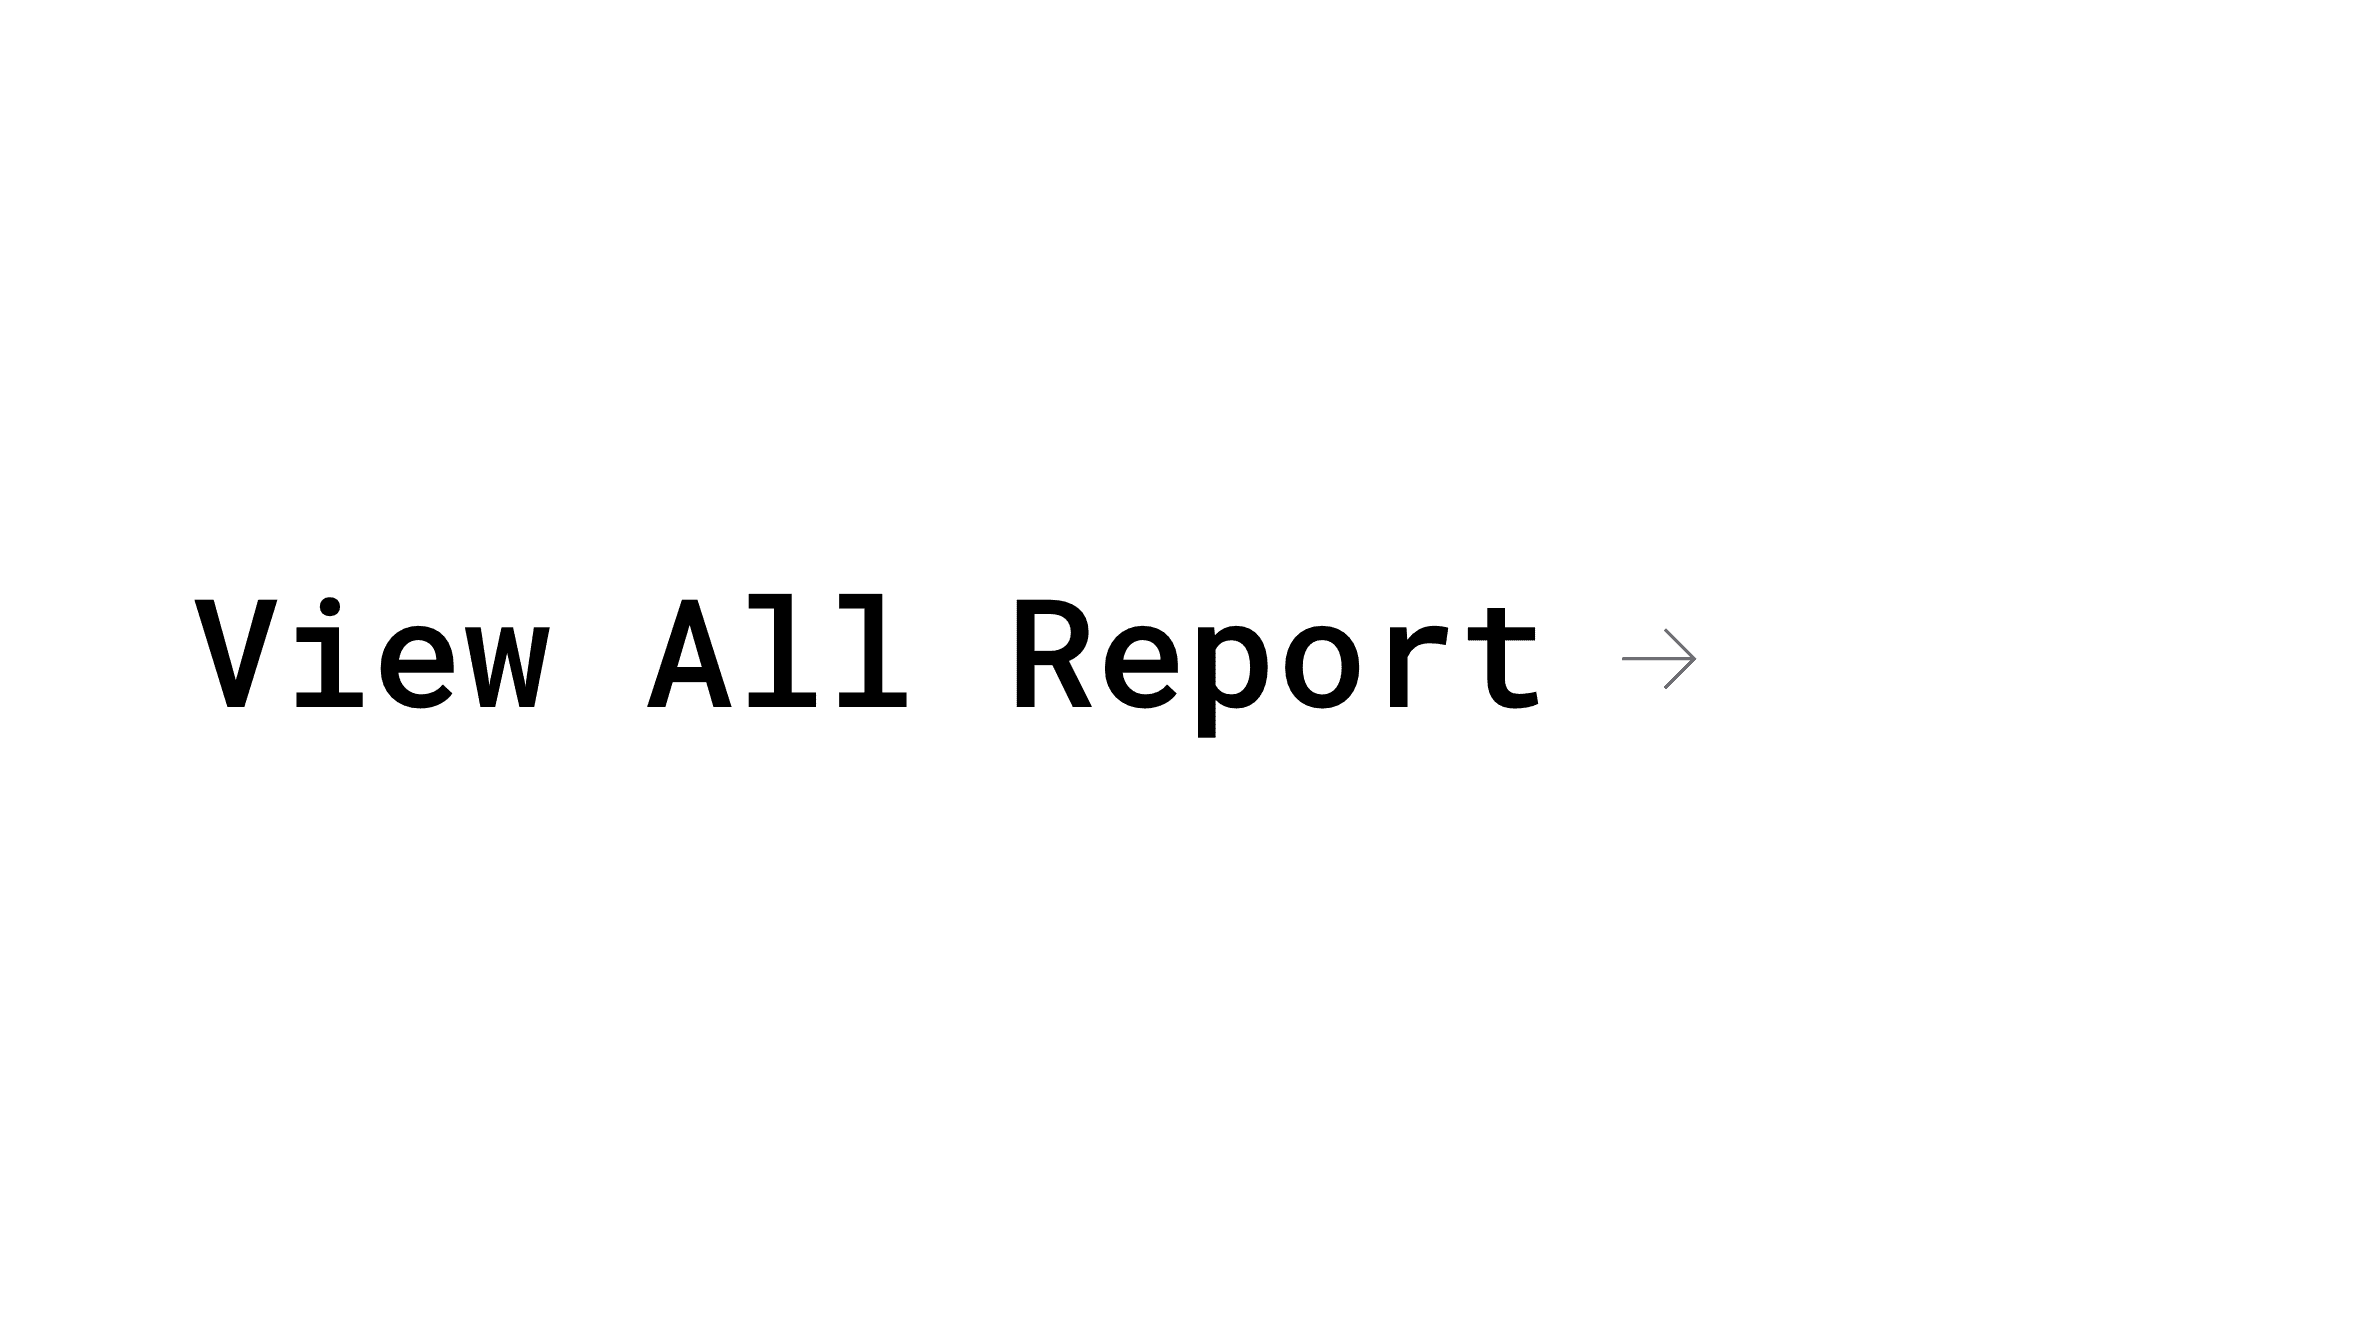 View All Report